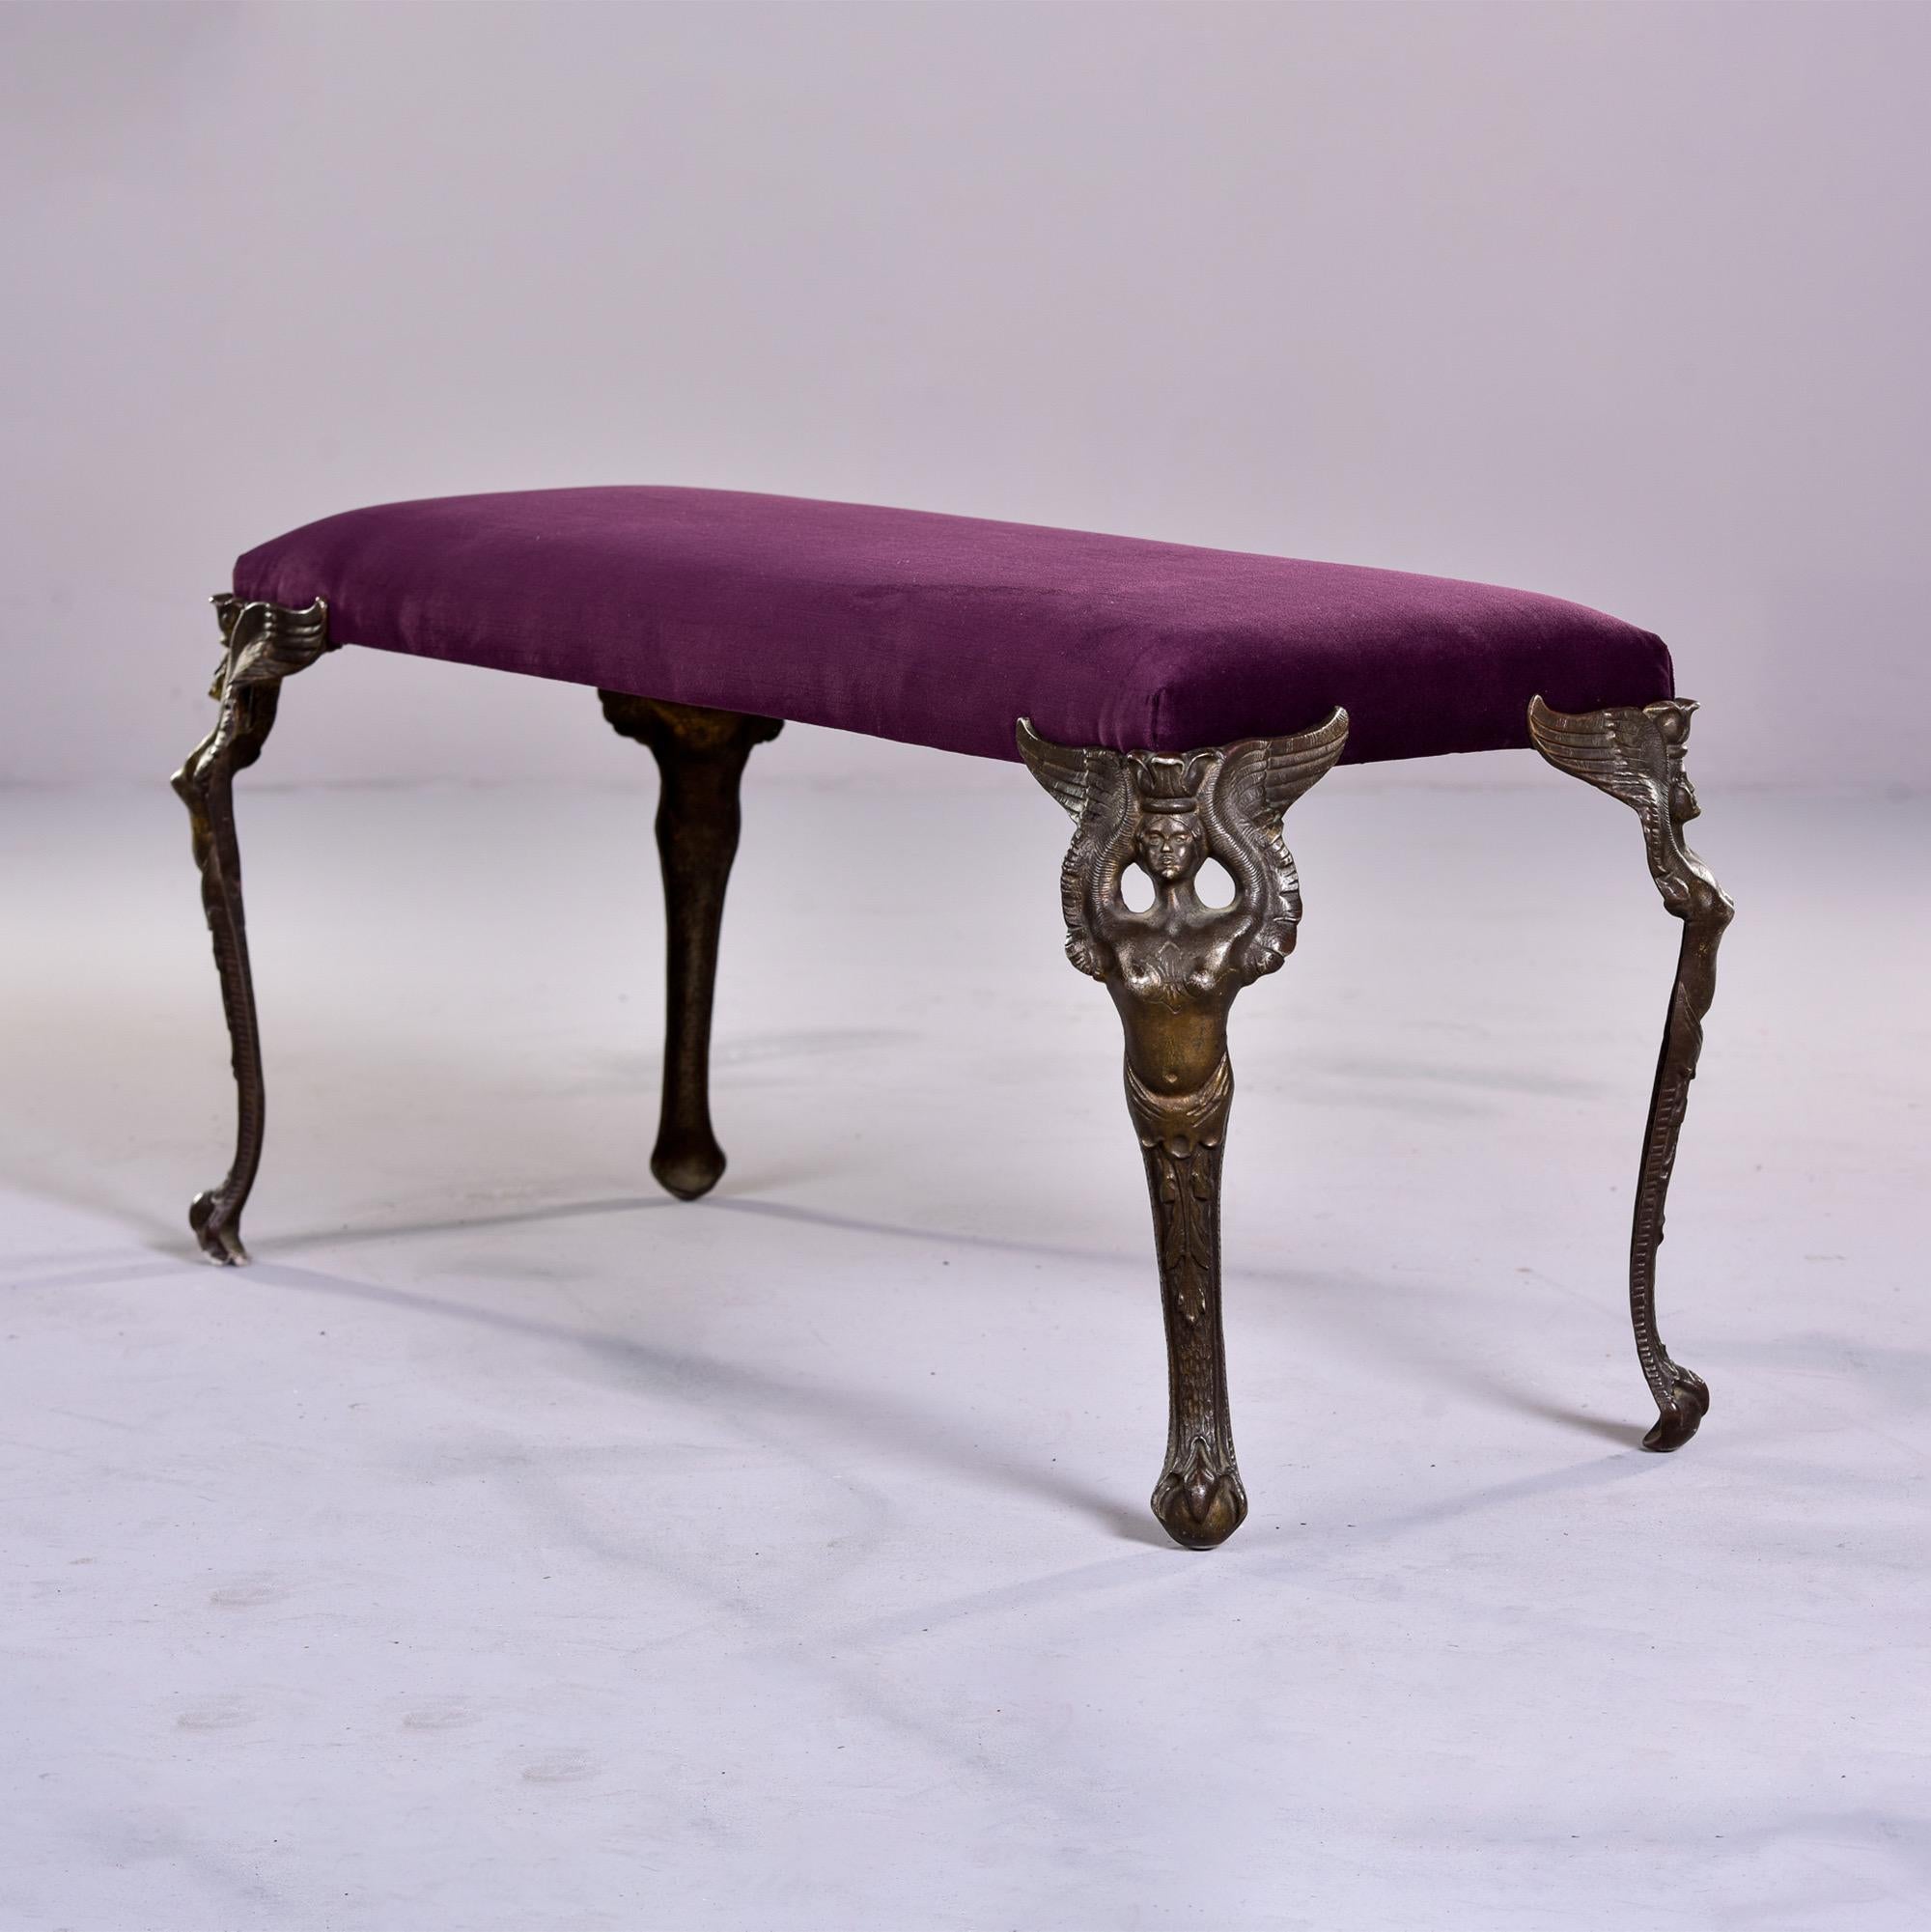 20th Century Art Deco Bench with Cast Bronze Figural Legs and New Velvet Upholstery